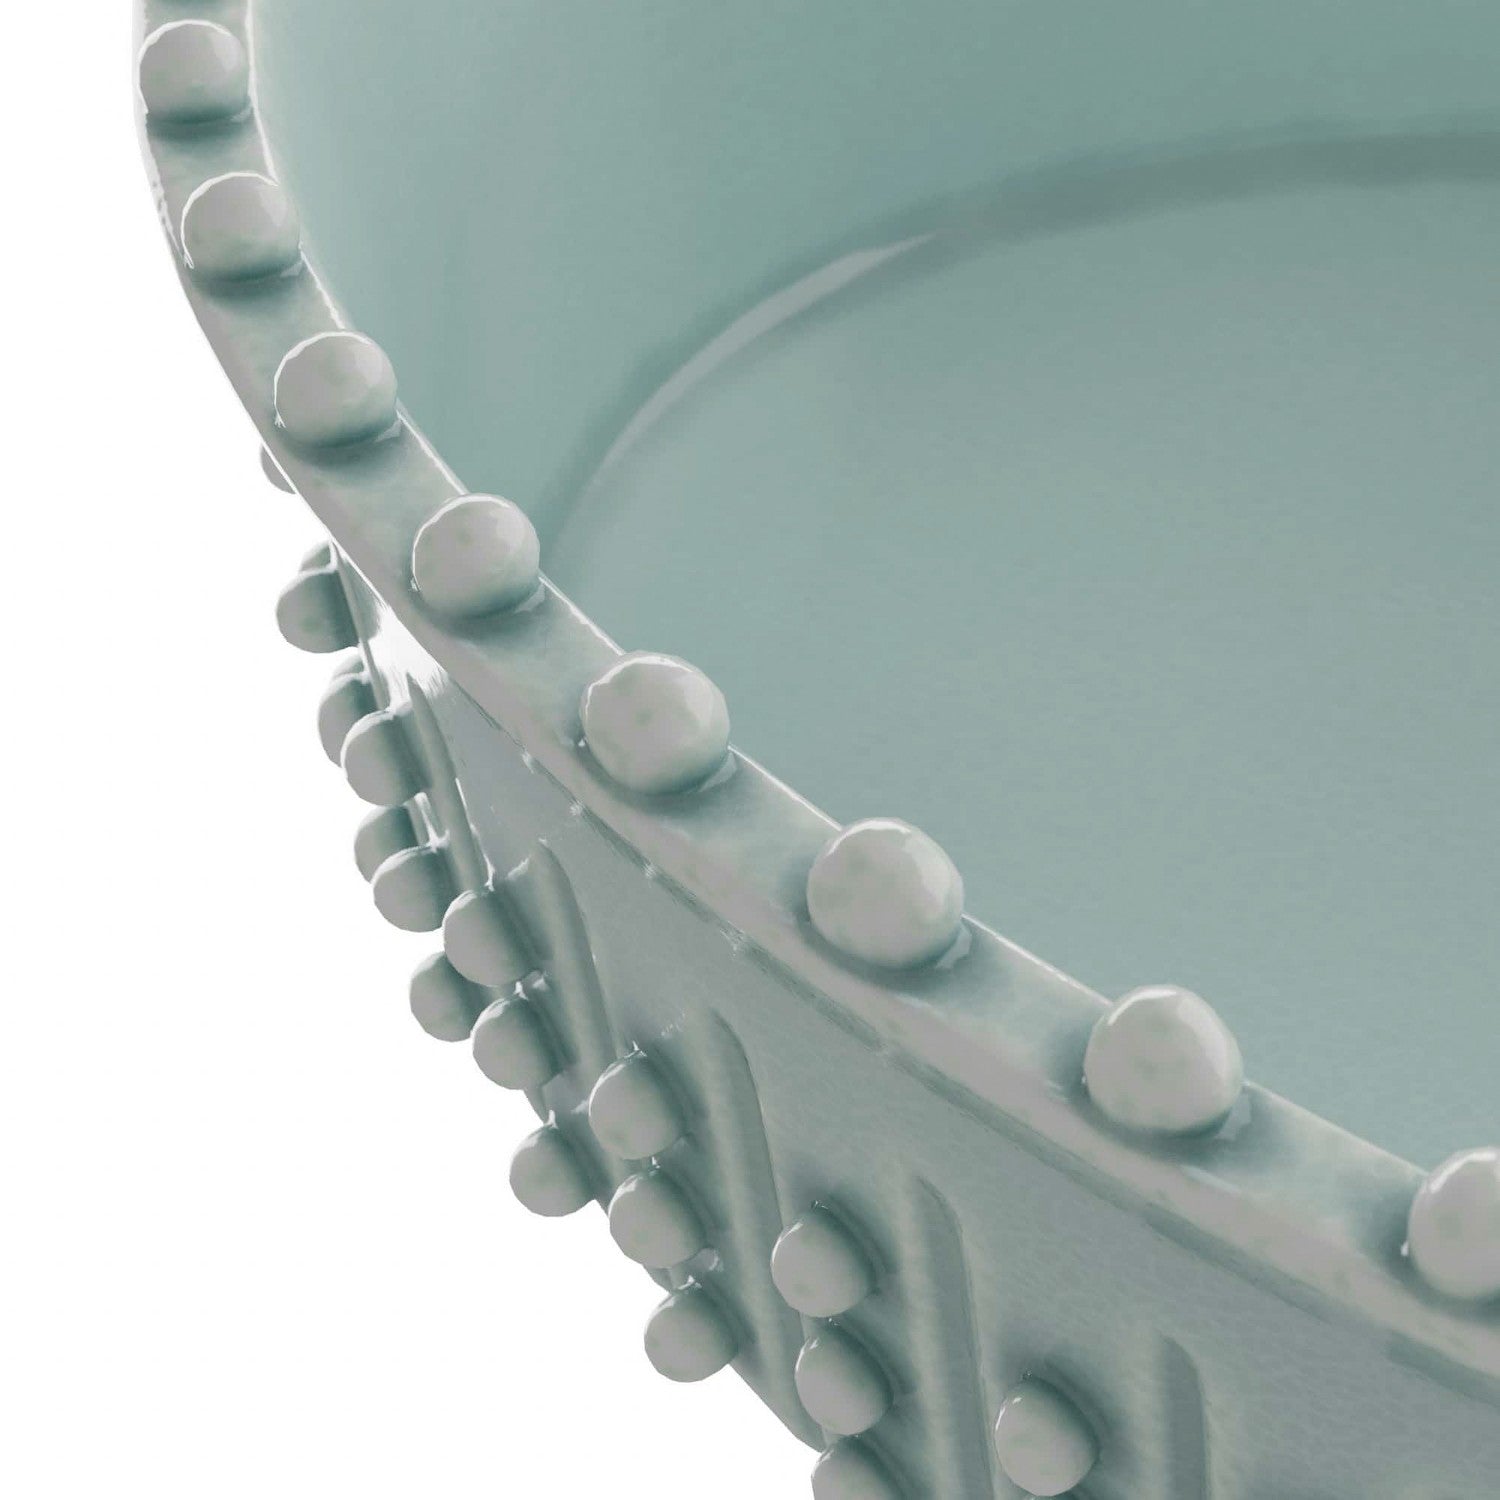 Centerpiece from the Spitzy collection in Celadon finish